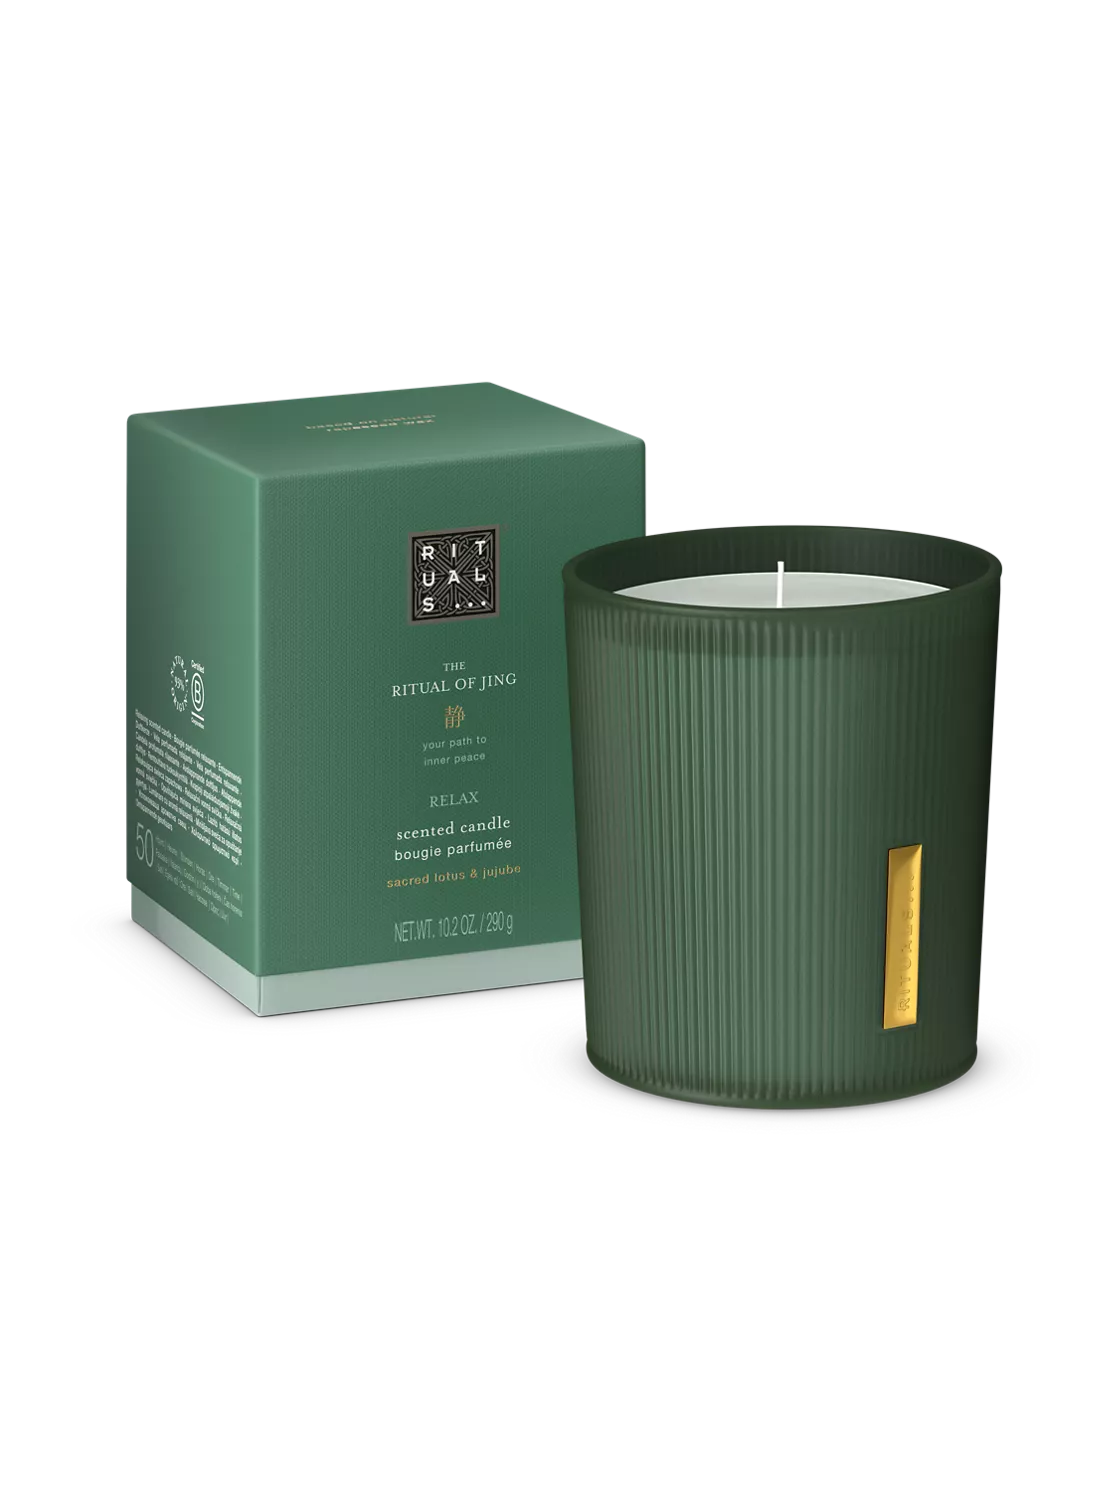 Rituals The Ritual of Jing Home Fragrance Scented Candle 290 g